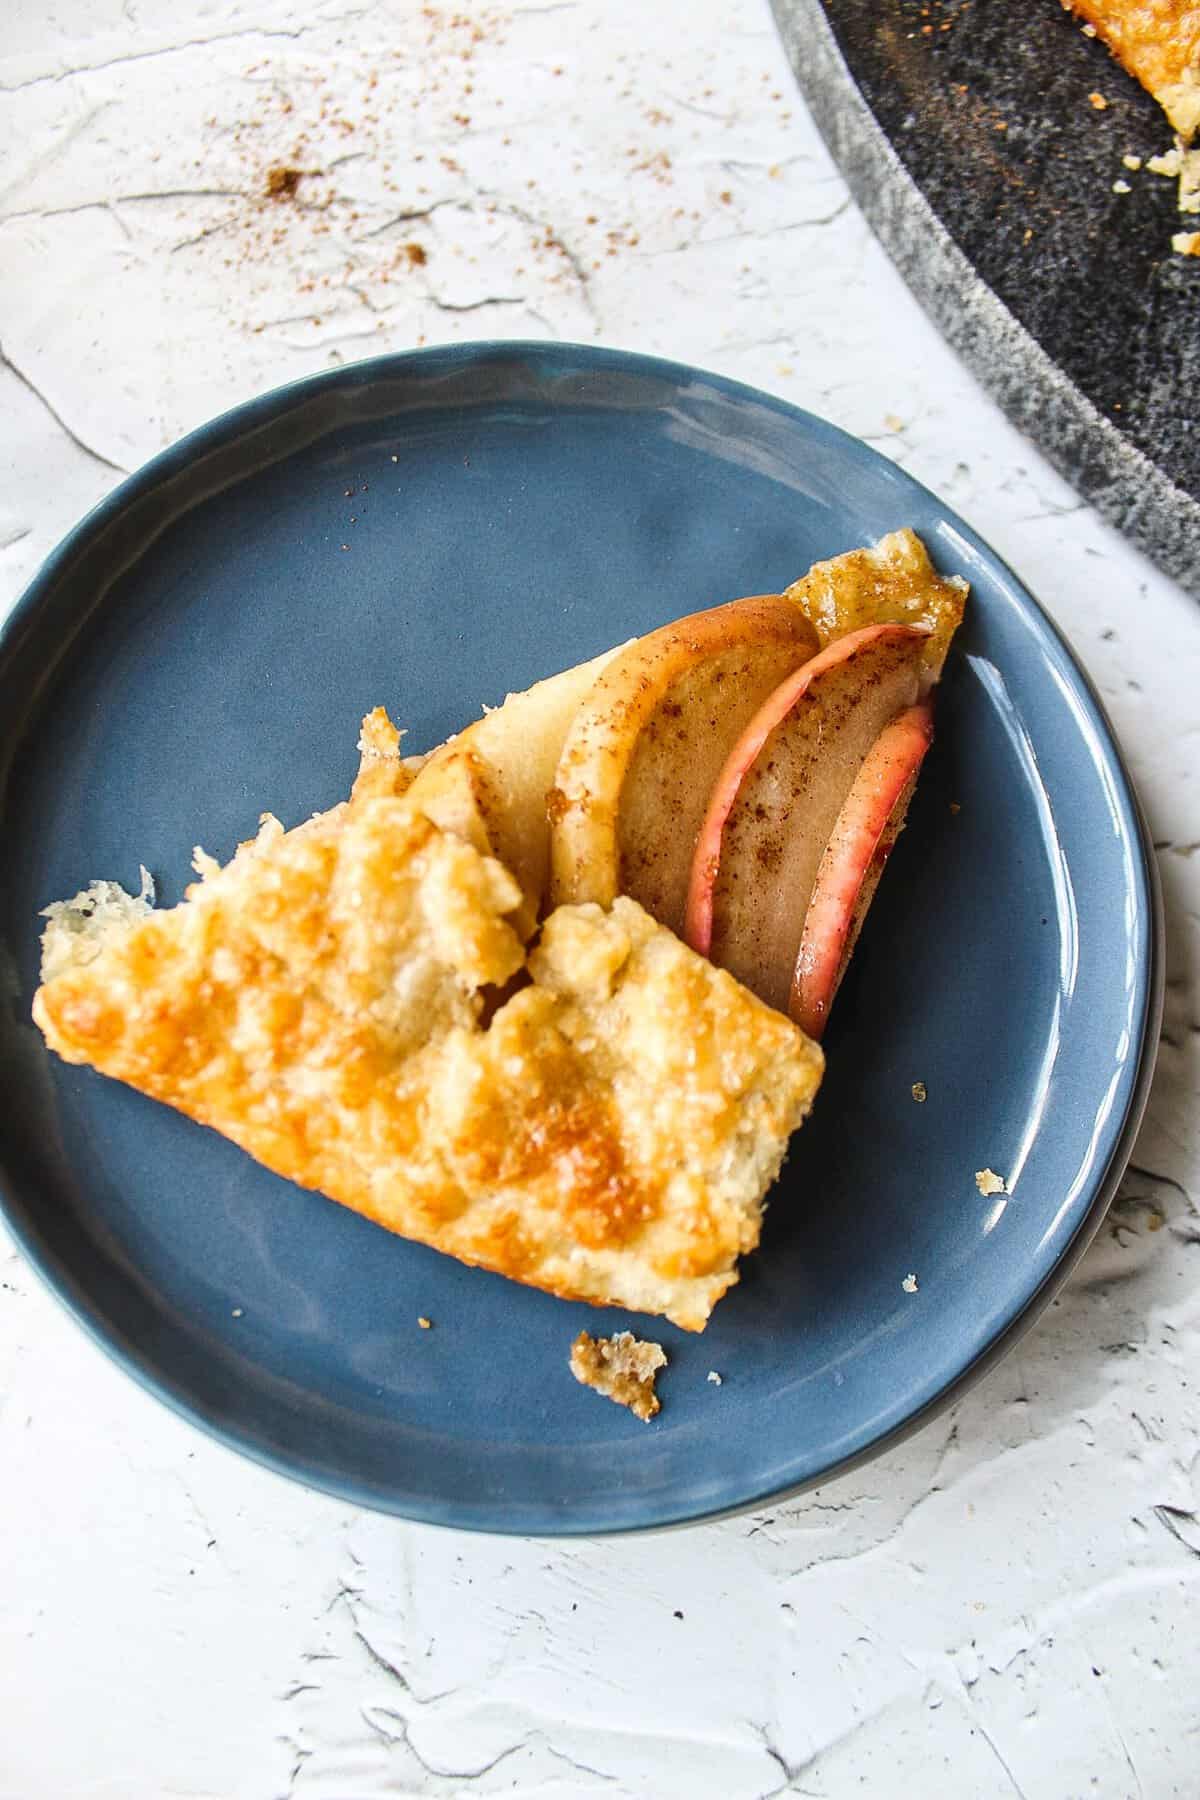 a slice of an apple galette on a plate